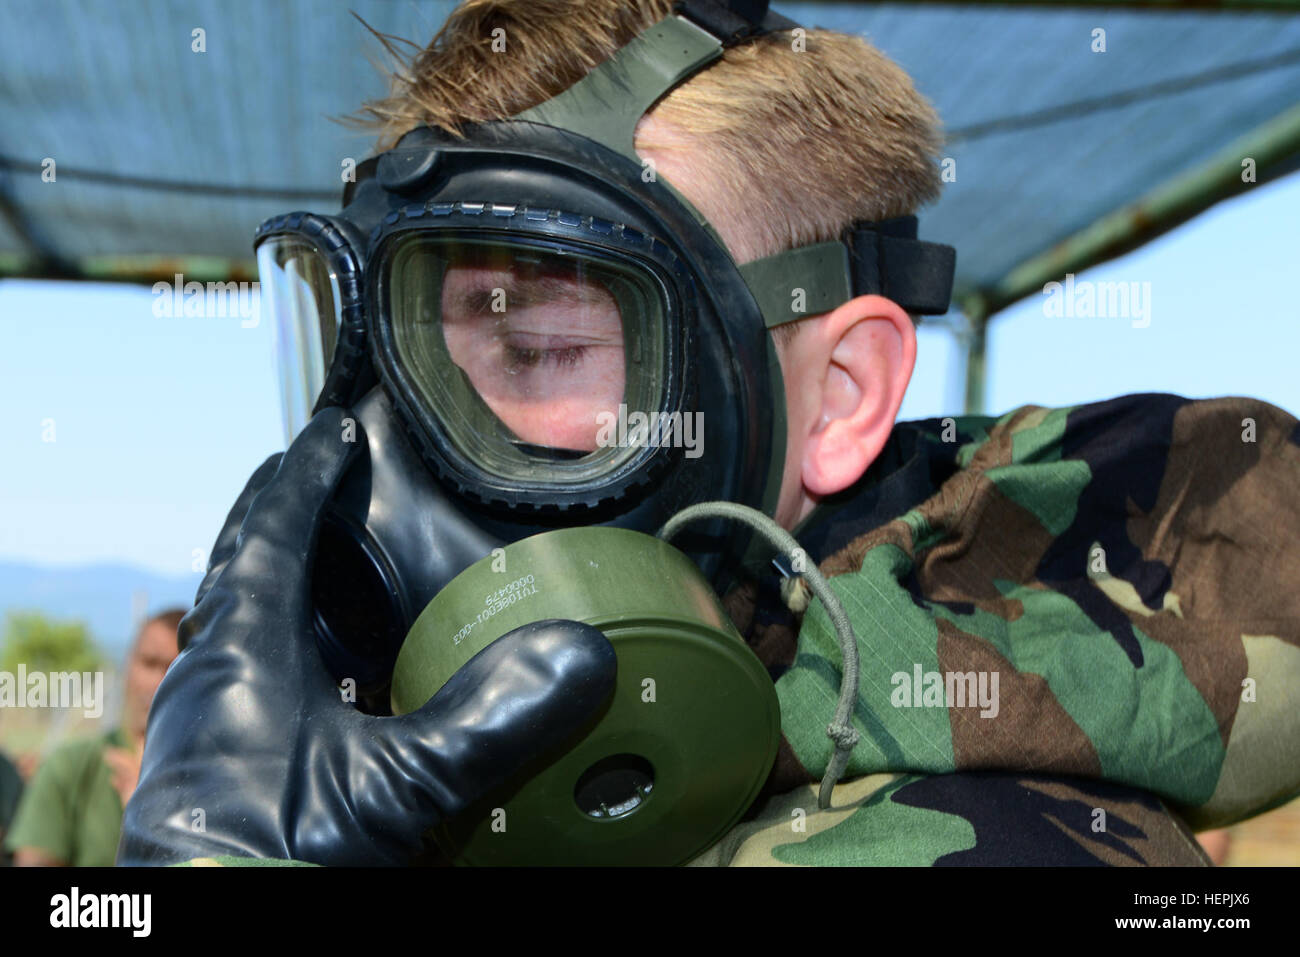 A U.S. Army paratrooper assigned to the 173rd Airborne Brigade’s chemical, biological, radiological and nuclear platoon checks his protective mask Sept. 1, 2015 before entering a tear-gas chamber during bilateral exercise Toxic Dragon in Rieti, Italy. Toxic Dragon brought together troops from the 173rd Airborne and the Italian Army’s 7th CBRN Regiment to share techniques and improve interoperability. (Photo by VI Specialist Elena Baladelli/released) Exercise Toxic Dragon 150901-A-II094-013 Stock Photo